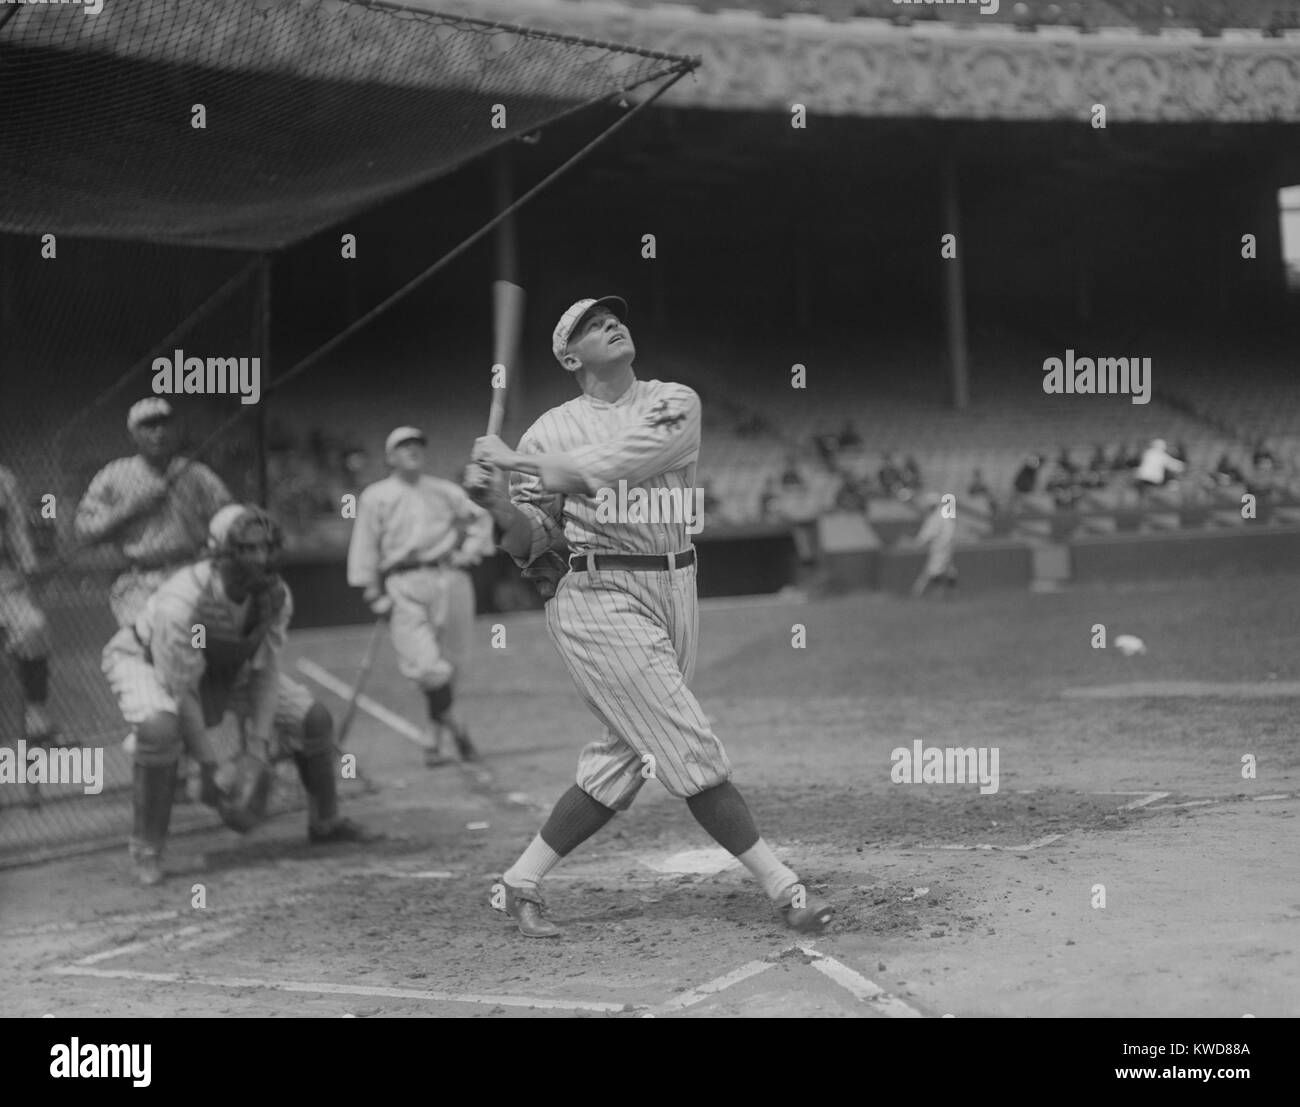 Royce 'Ross' Youngs played ten seasons in Major League Baseball for the New York Giants. His career ended when he died of Bright's disease at the age of 30 in 1927. (BSLOC 2015 17 16) Stock Photo